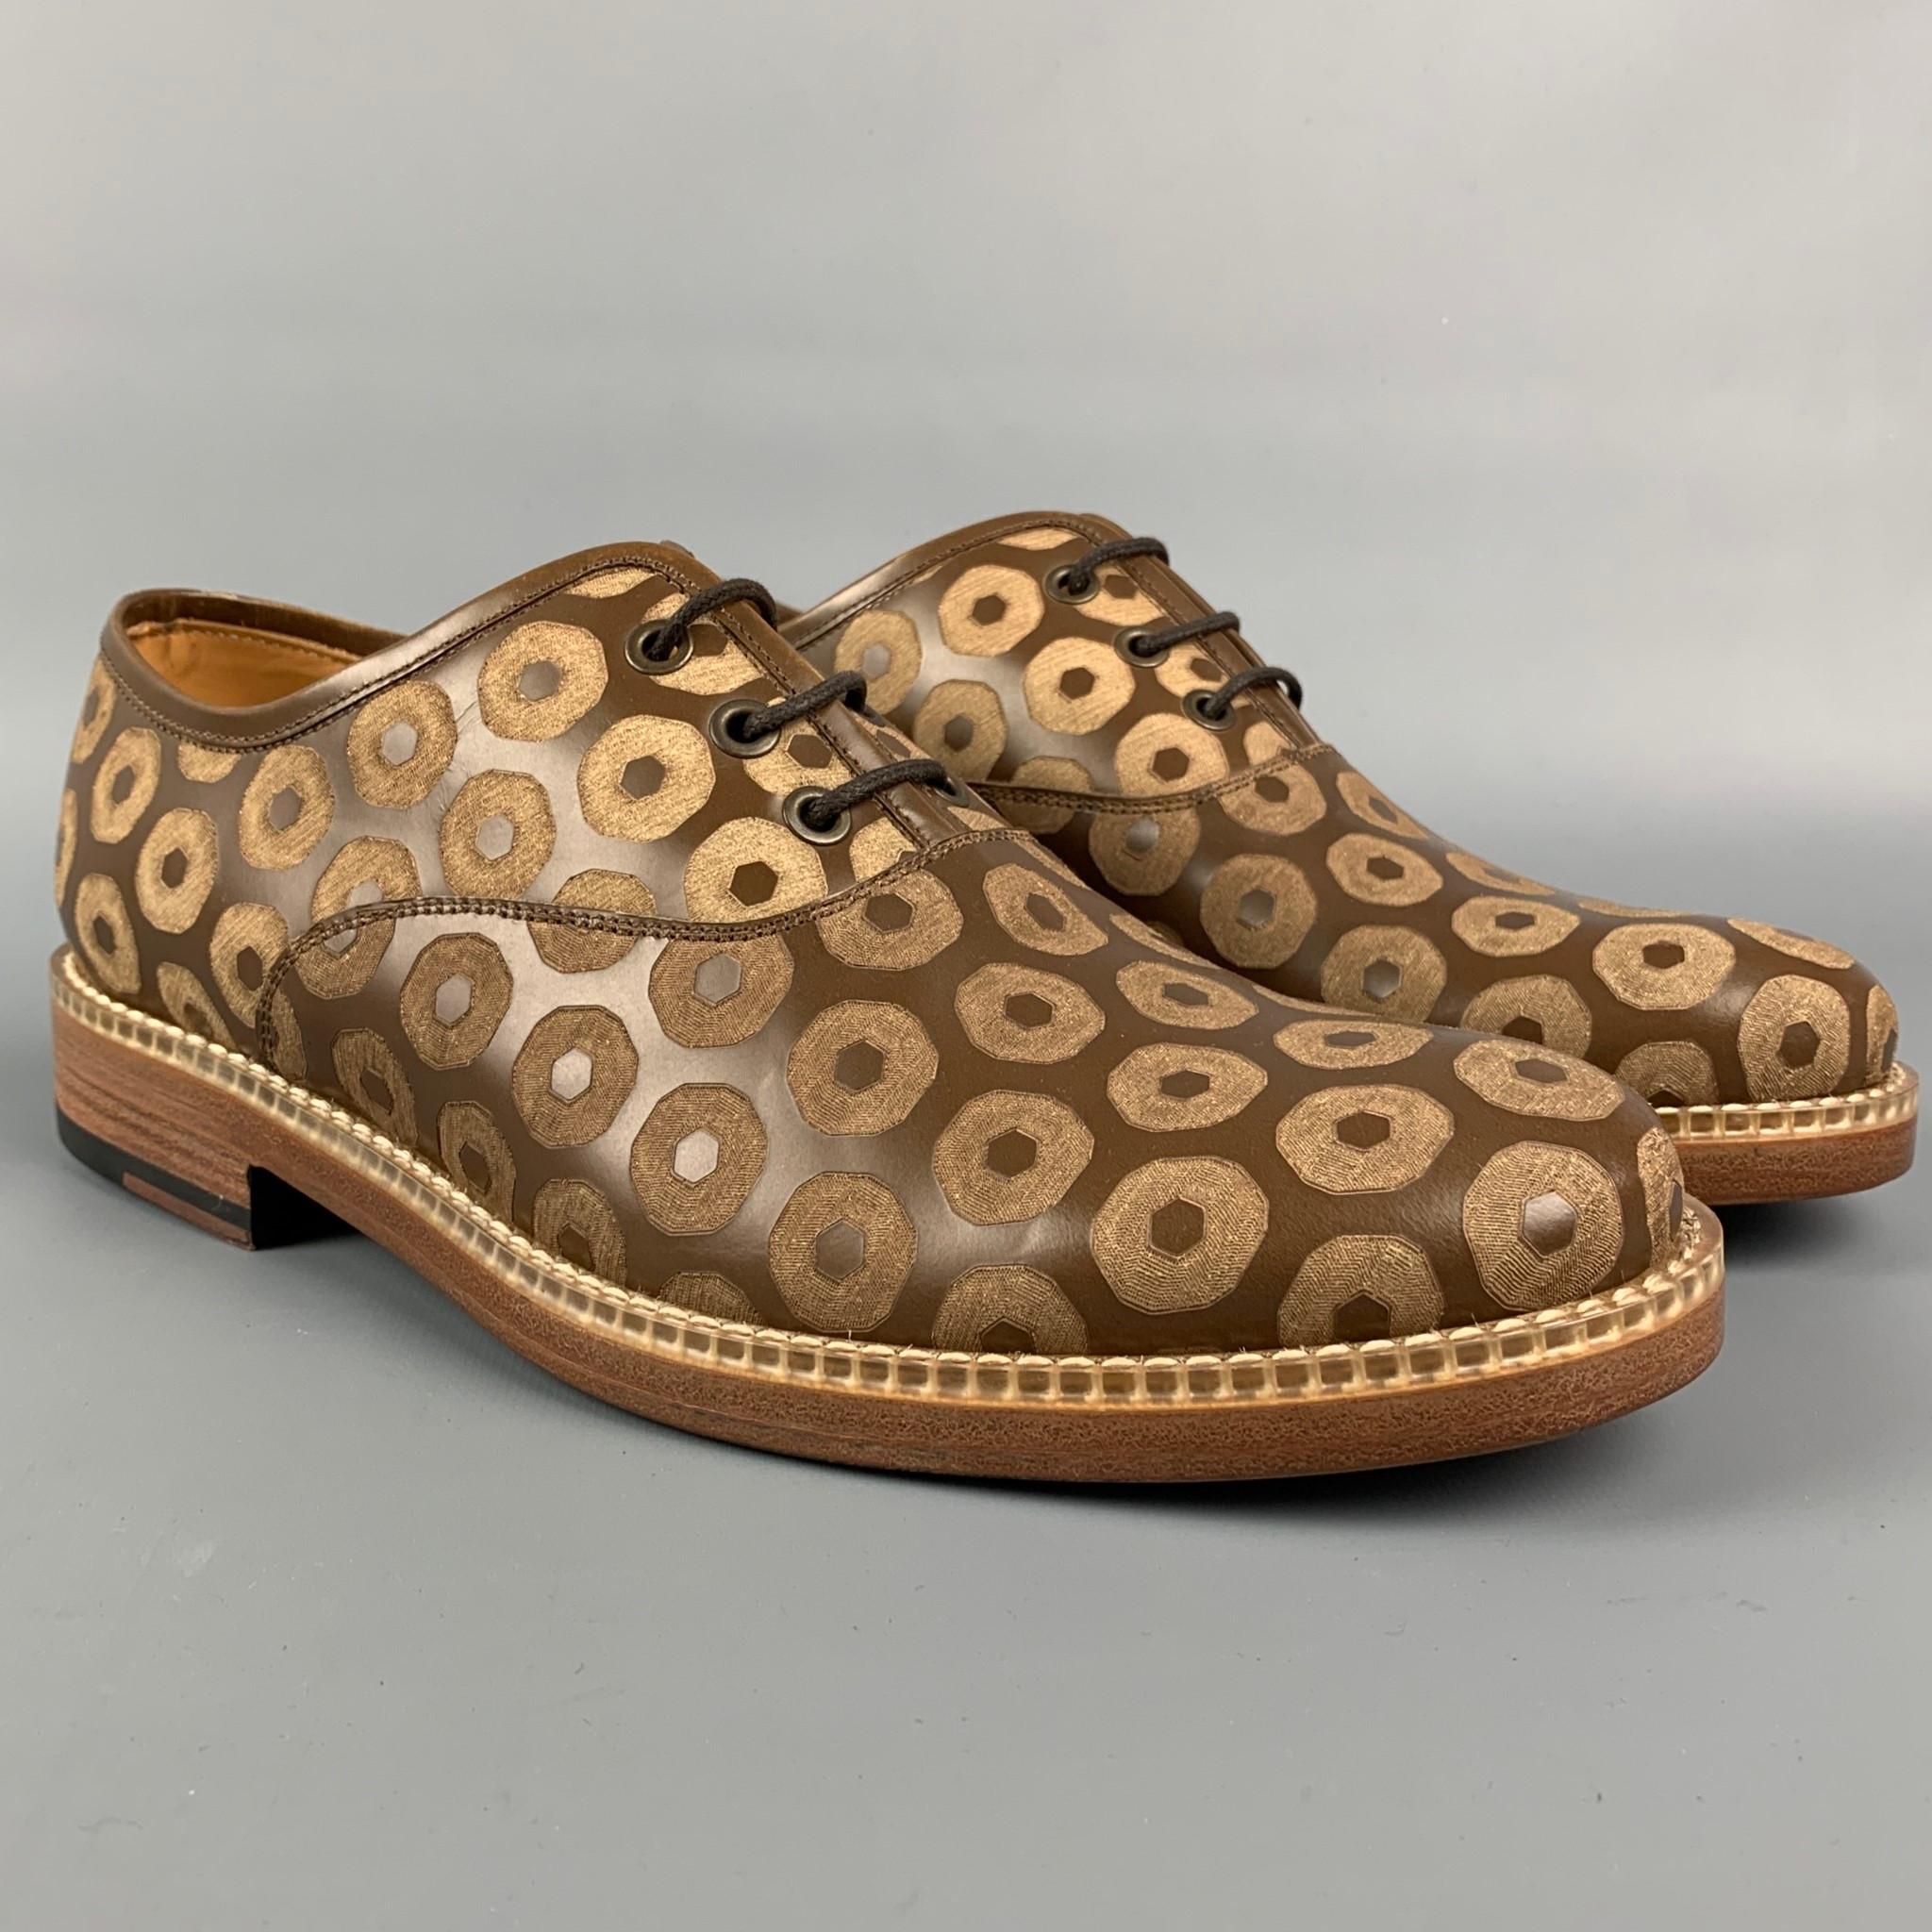 MARC JACOBS shoes comes in a brown leather featuring a laser cut design featuring a round toe and a lace up closure. Made in Italy.

Excellent Pre-Owned Condition.
Marked: 41 / 7

Outsole: 11 in. x 4 in. 